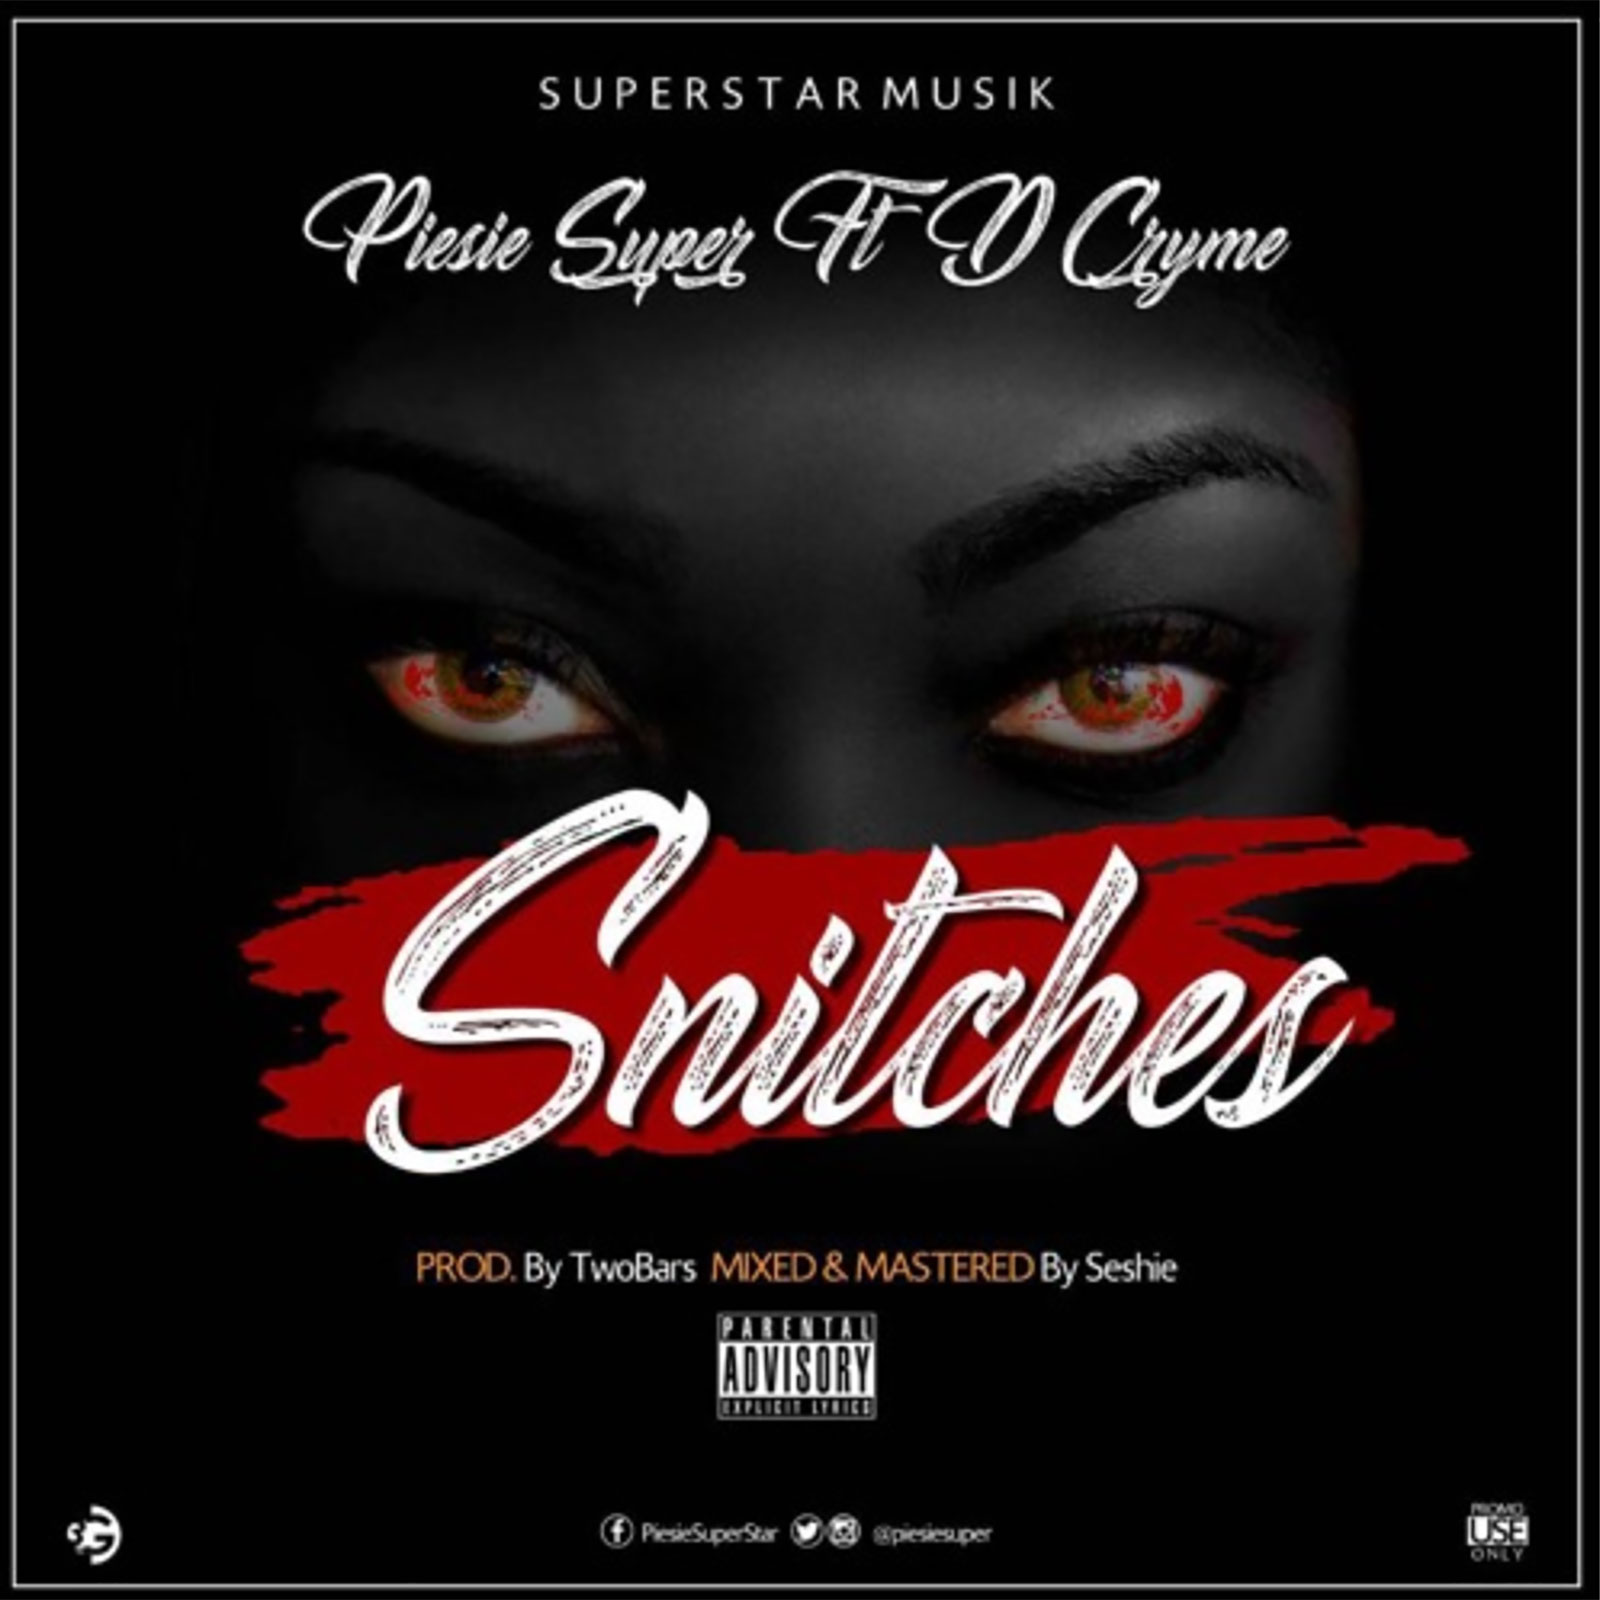 Snitches (Explicit) by Piese Super feat. Dr Cryme